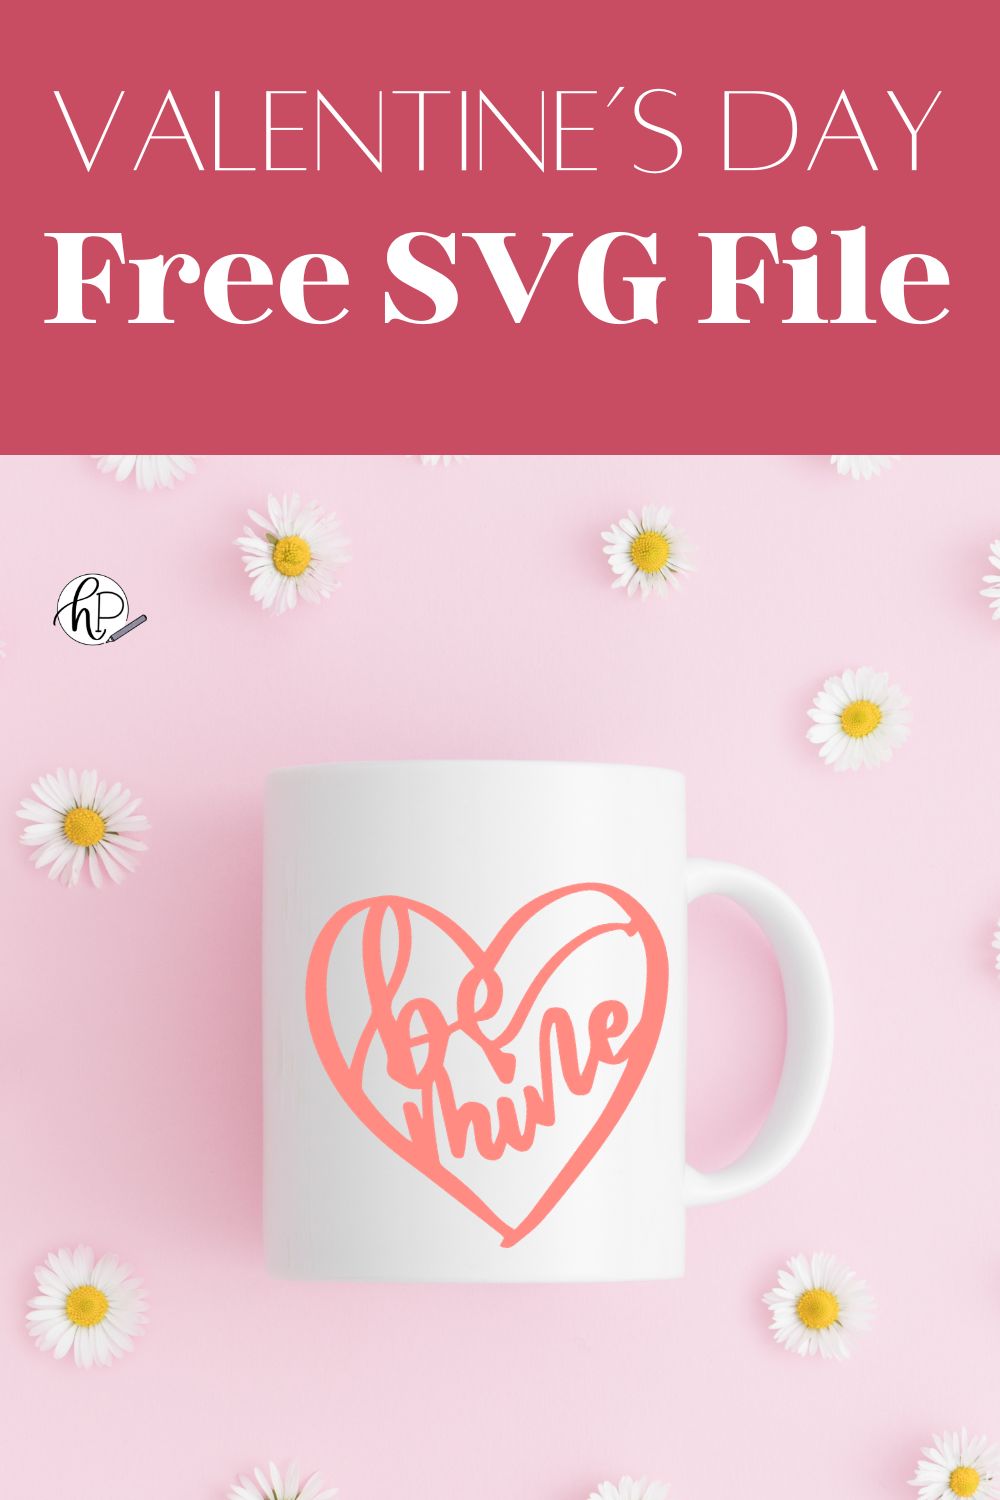 title reads: valentine's day free SVG file, image of be mine hand lettered inside a heart shape cut out of pink vinyl and applied to plain white mug